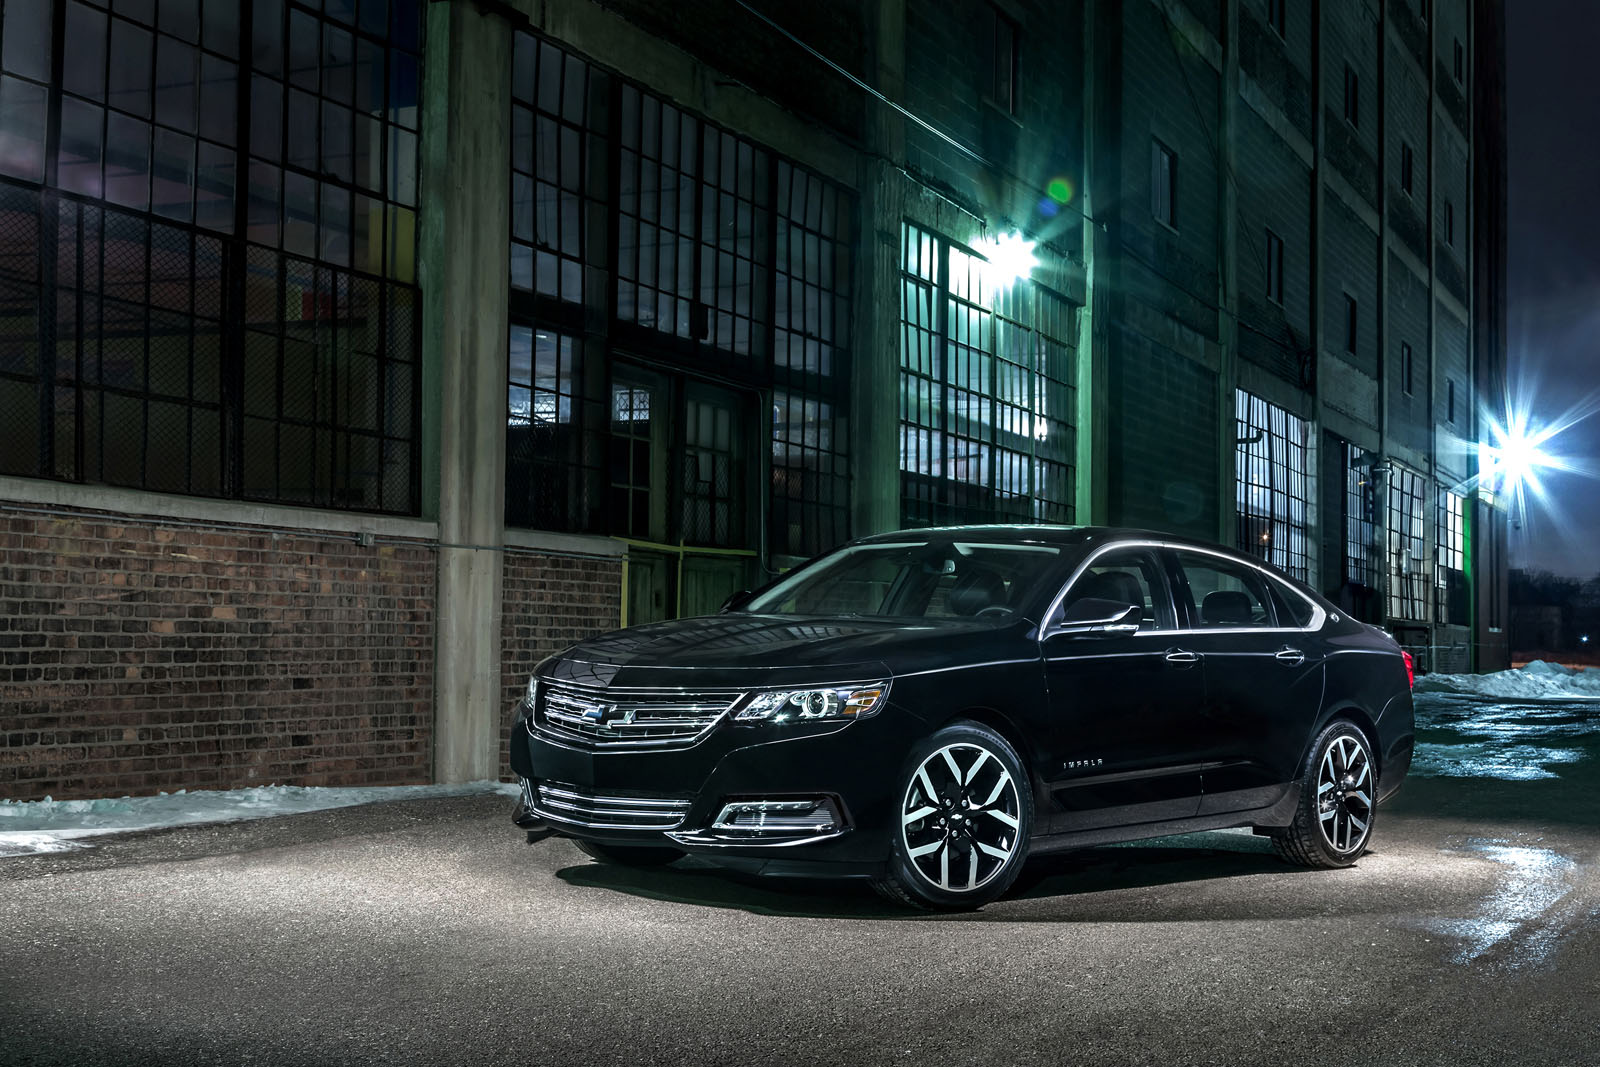 The Chevrolet Impala Midnight Edition, based on a concept shown at the 2014 SEMA Show in Las Vegas, is outfitted to give the full-size sedan a more dramatic, sinister look, and will arrive in dealerships early this summer.